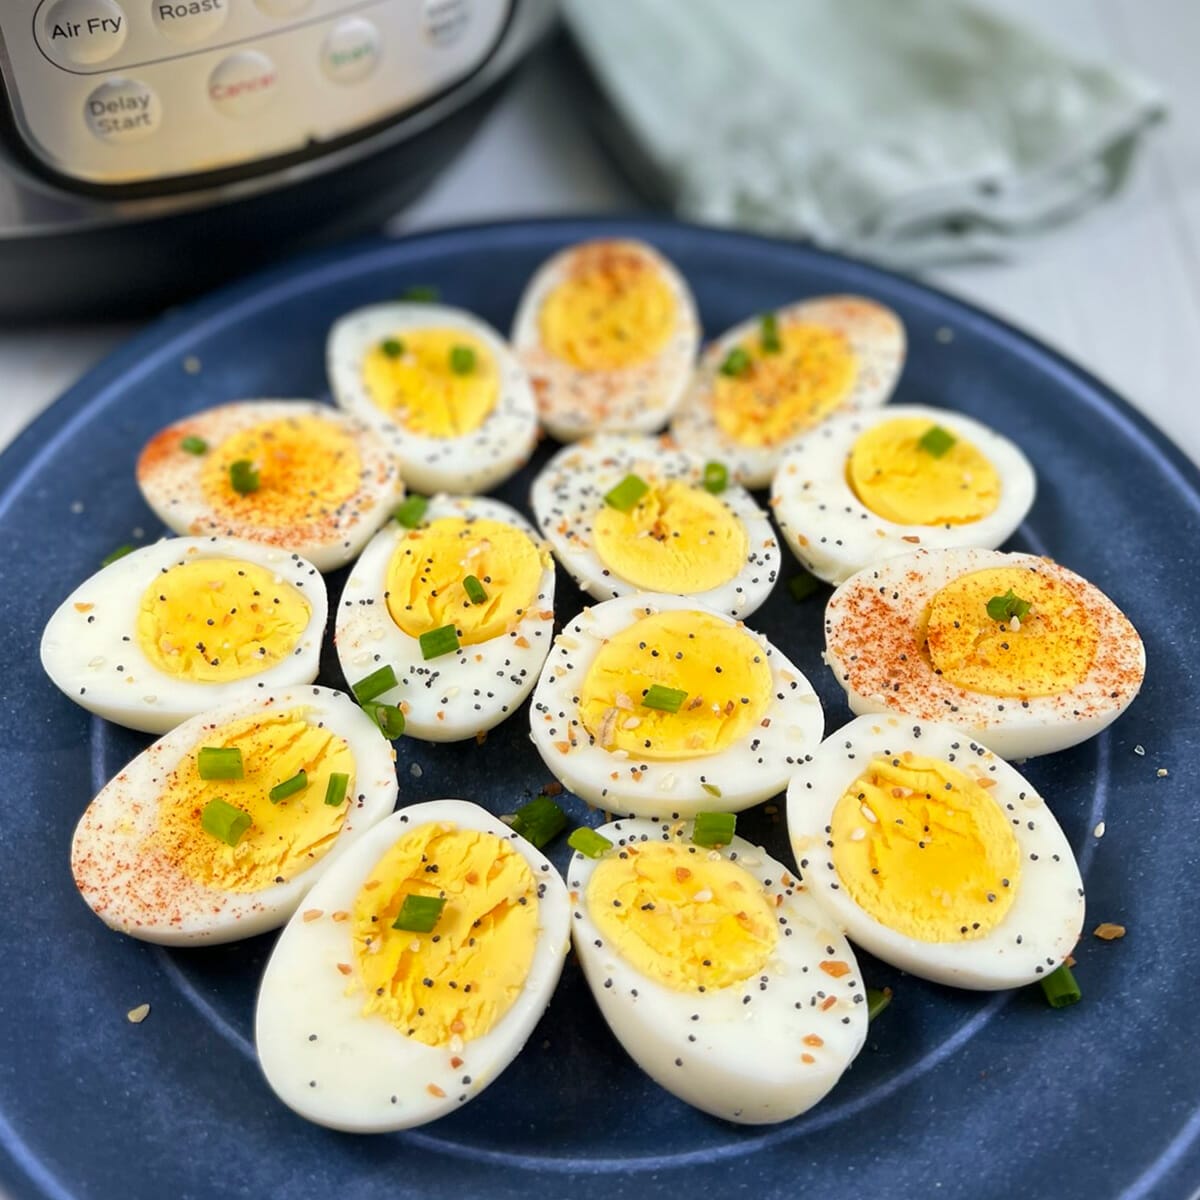 How to Make Perfect Instant Pot Hard Boiled Eggs - Fabulessly Frugal